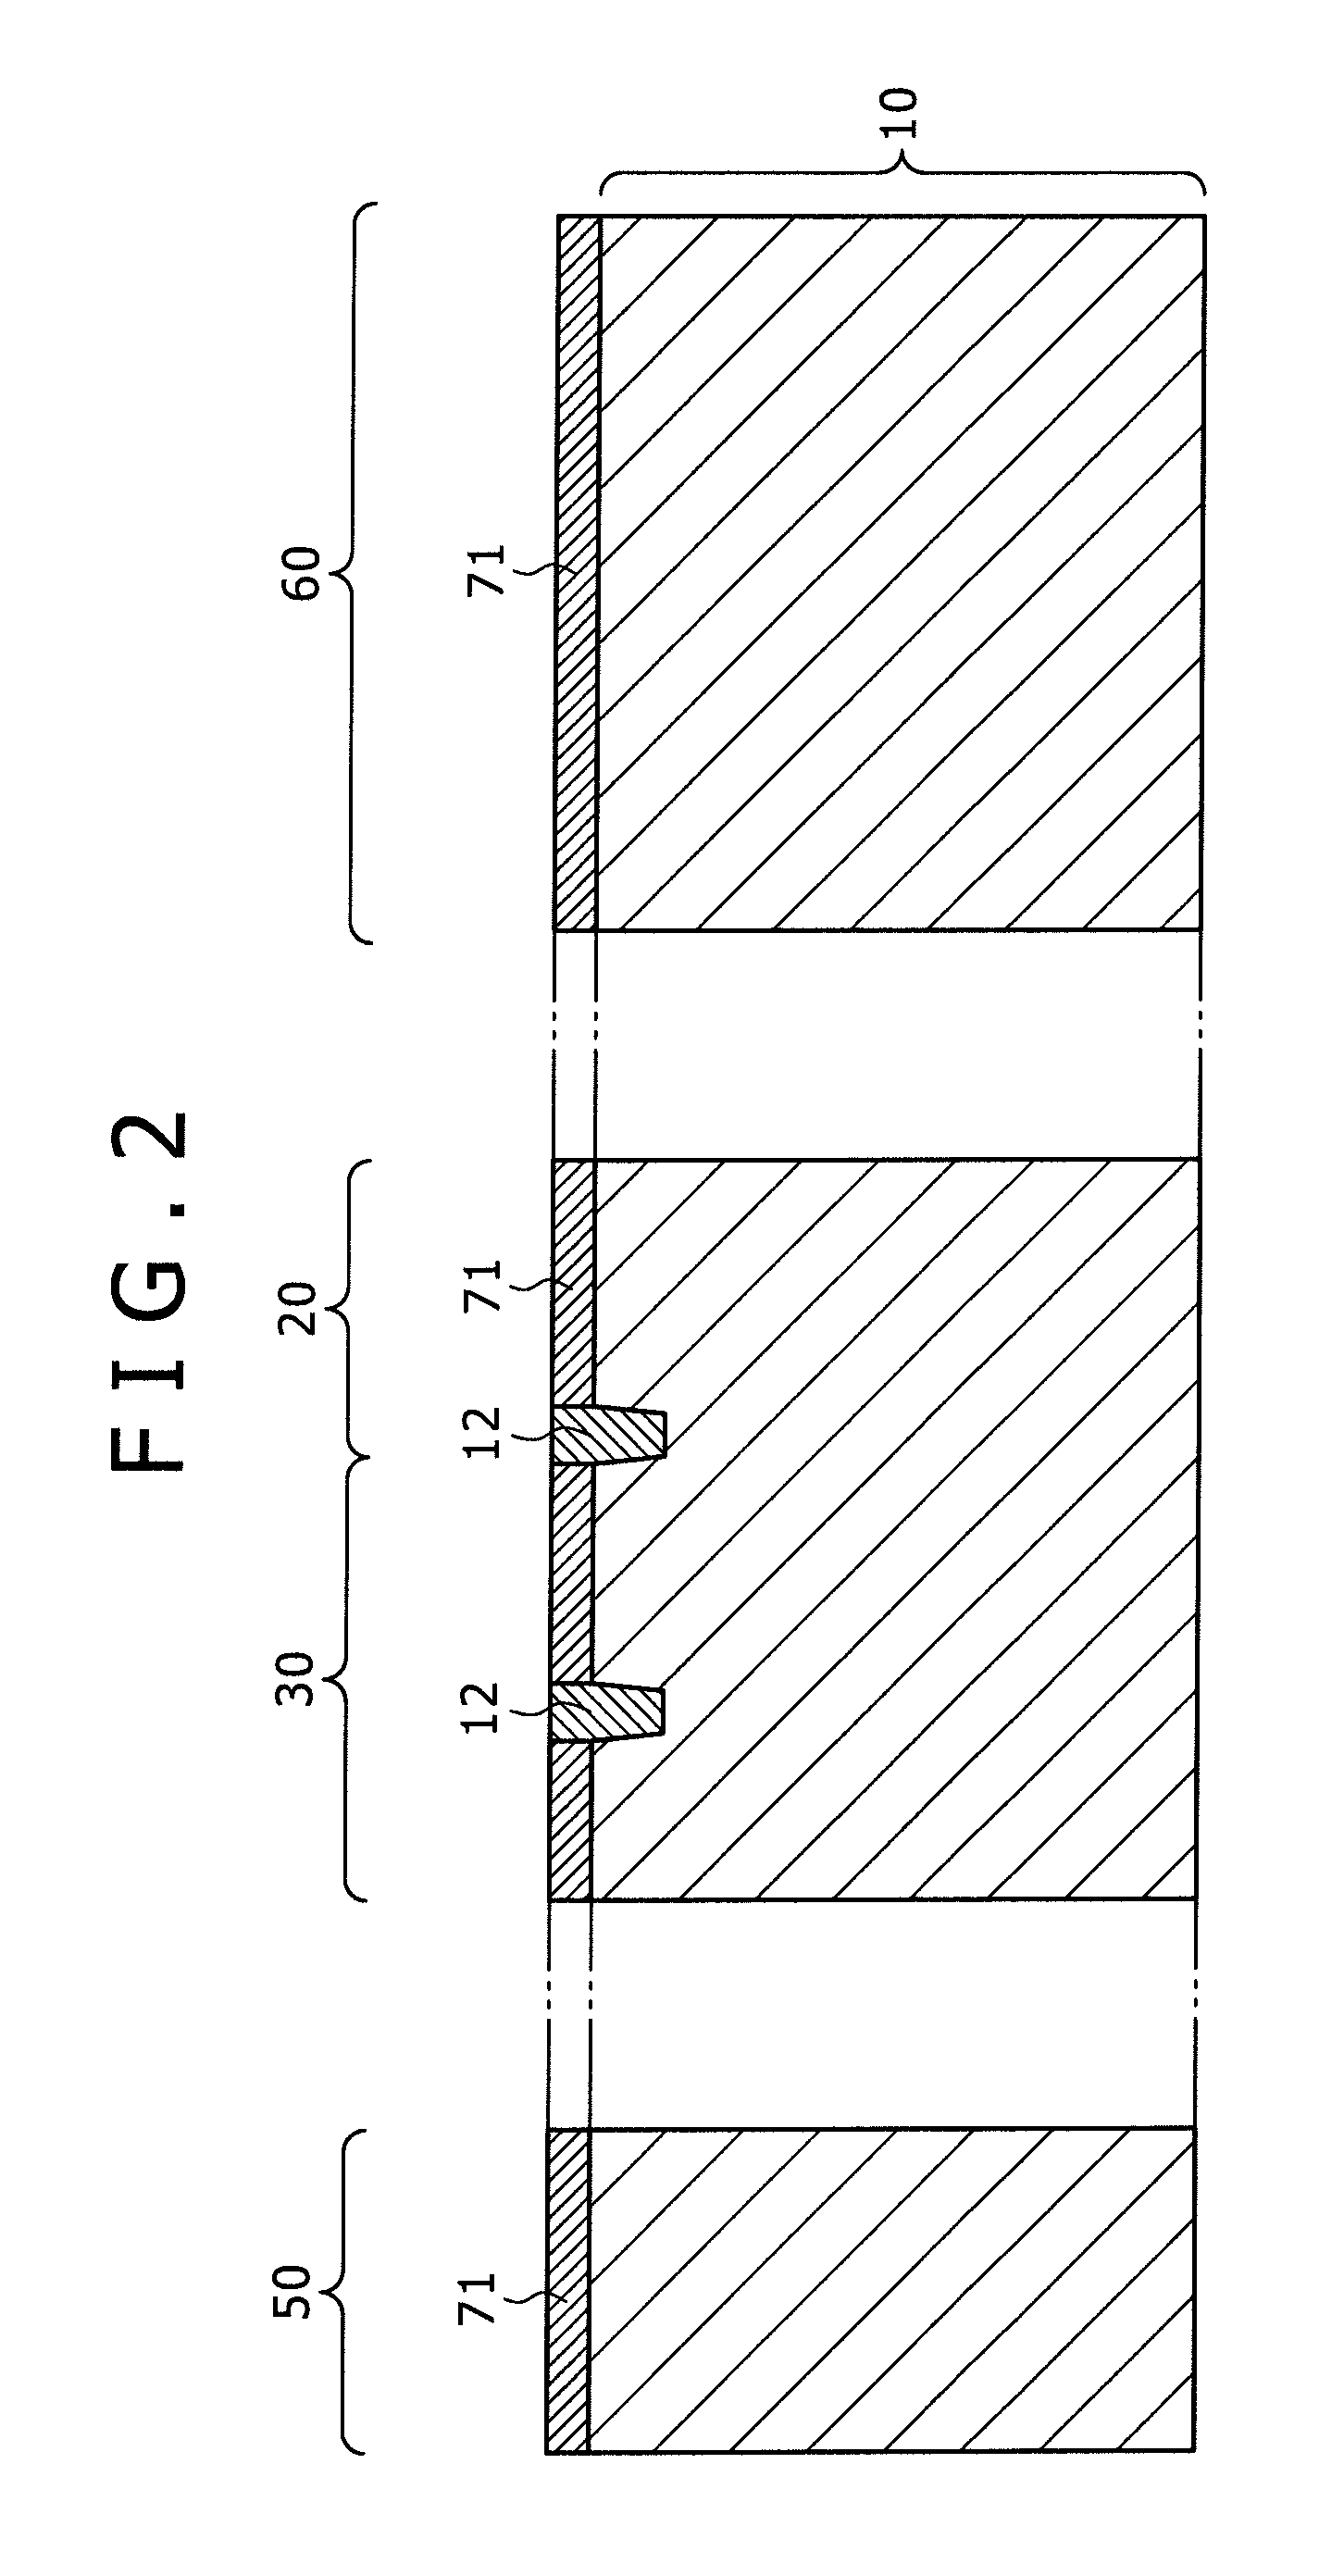 Solid-state image pickup device and a method of manufacturing the same